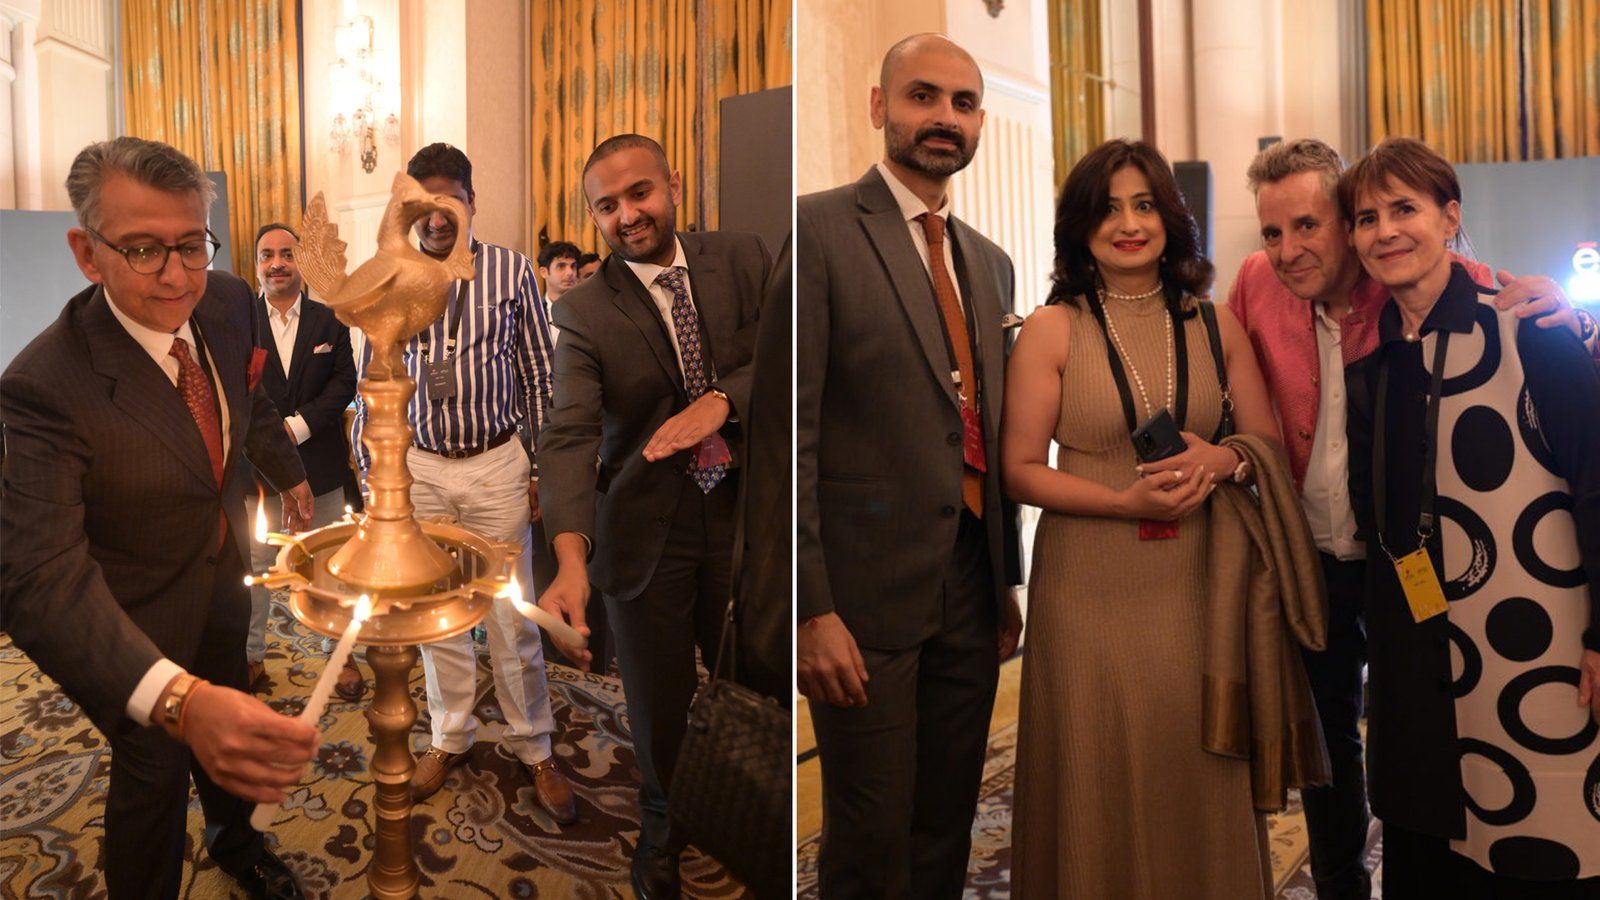 L: Yashowardhan Saboo and Pranav Saboo, CEO of Ethos lighting the traditional lamps. R: Juhi Chaturvedi, Senior Vice President, Ethos with Mr. & Mrs.Jean Marie Schaller